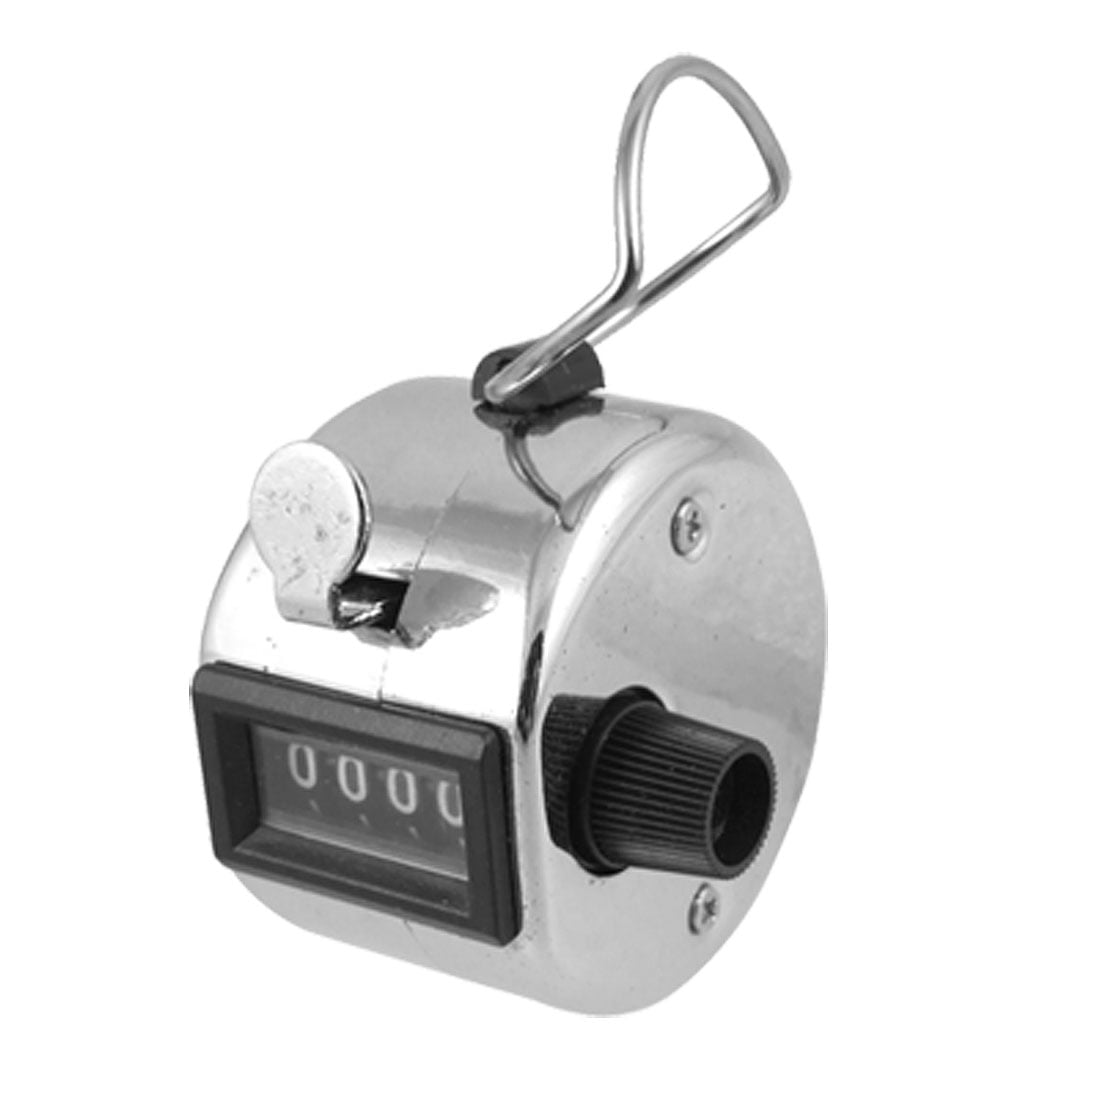 4 Digits Metal Hand Tally Counter Clicker for Statistic - Walmart.com